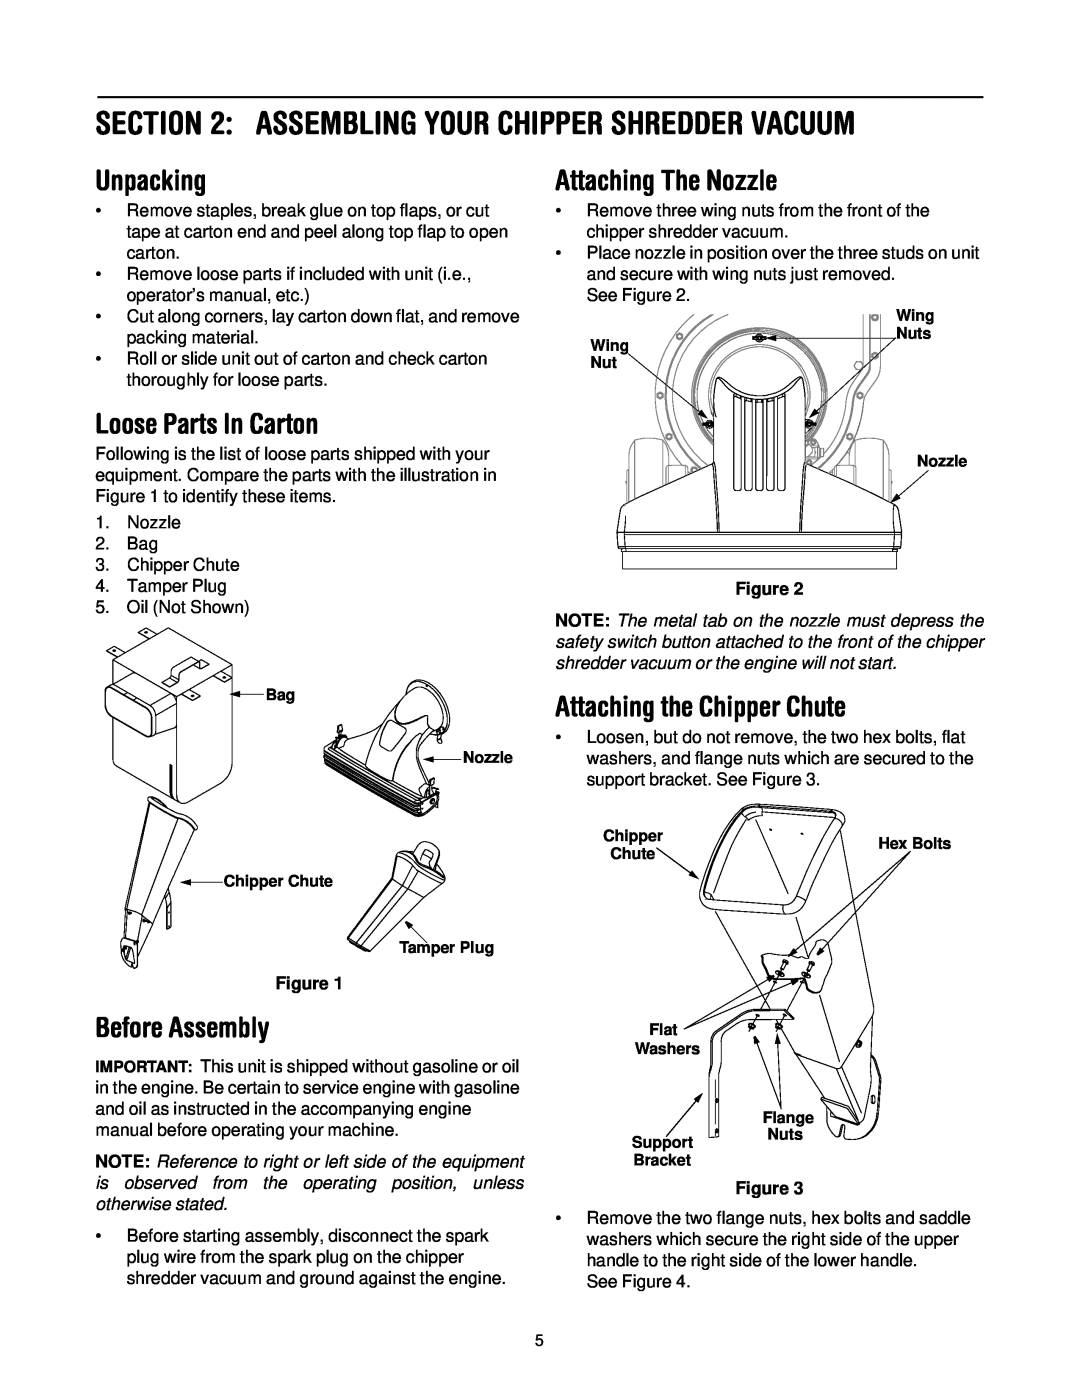 Troy-Bilt CSV206 manual Assembling Your Chipper Shredder Vacuum, Unpacking, Loose Parts In Carton, Attaching The Nozzle 